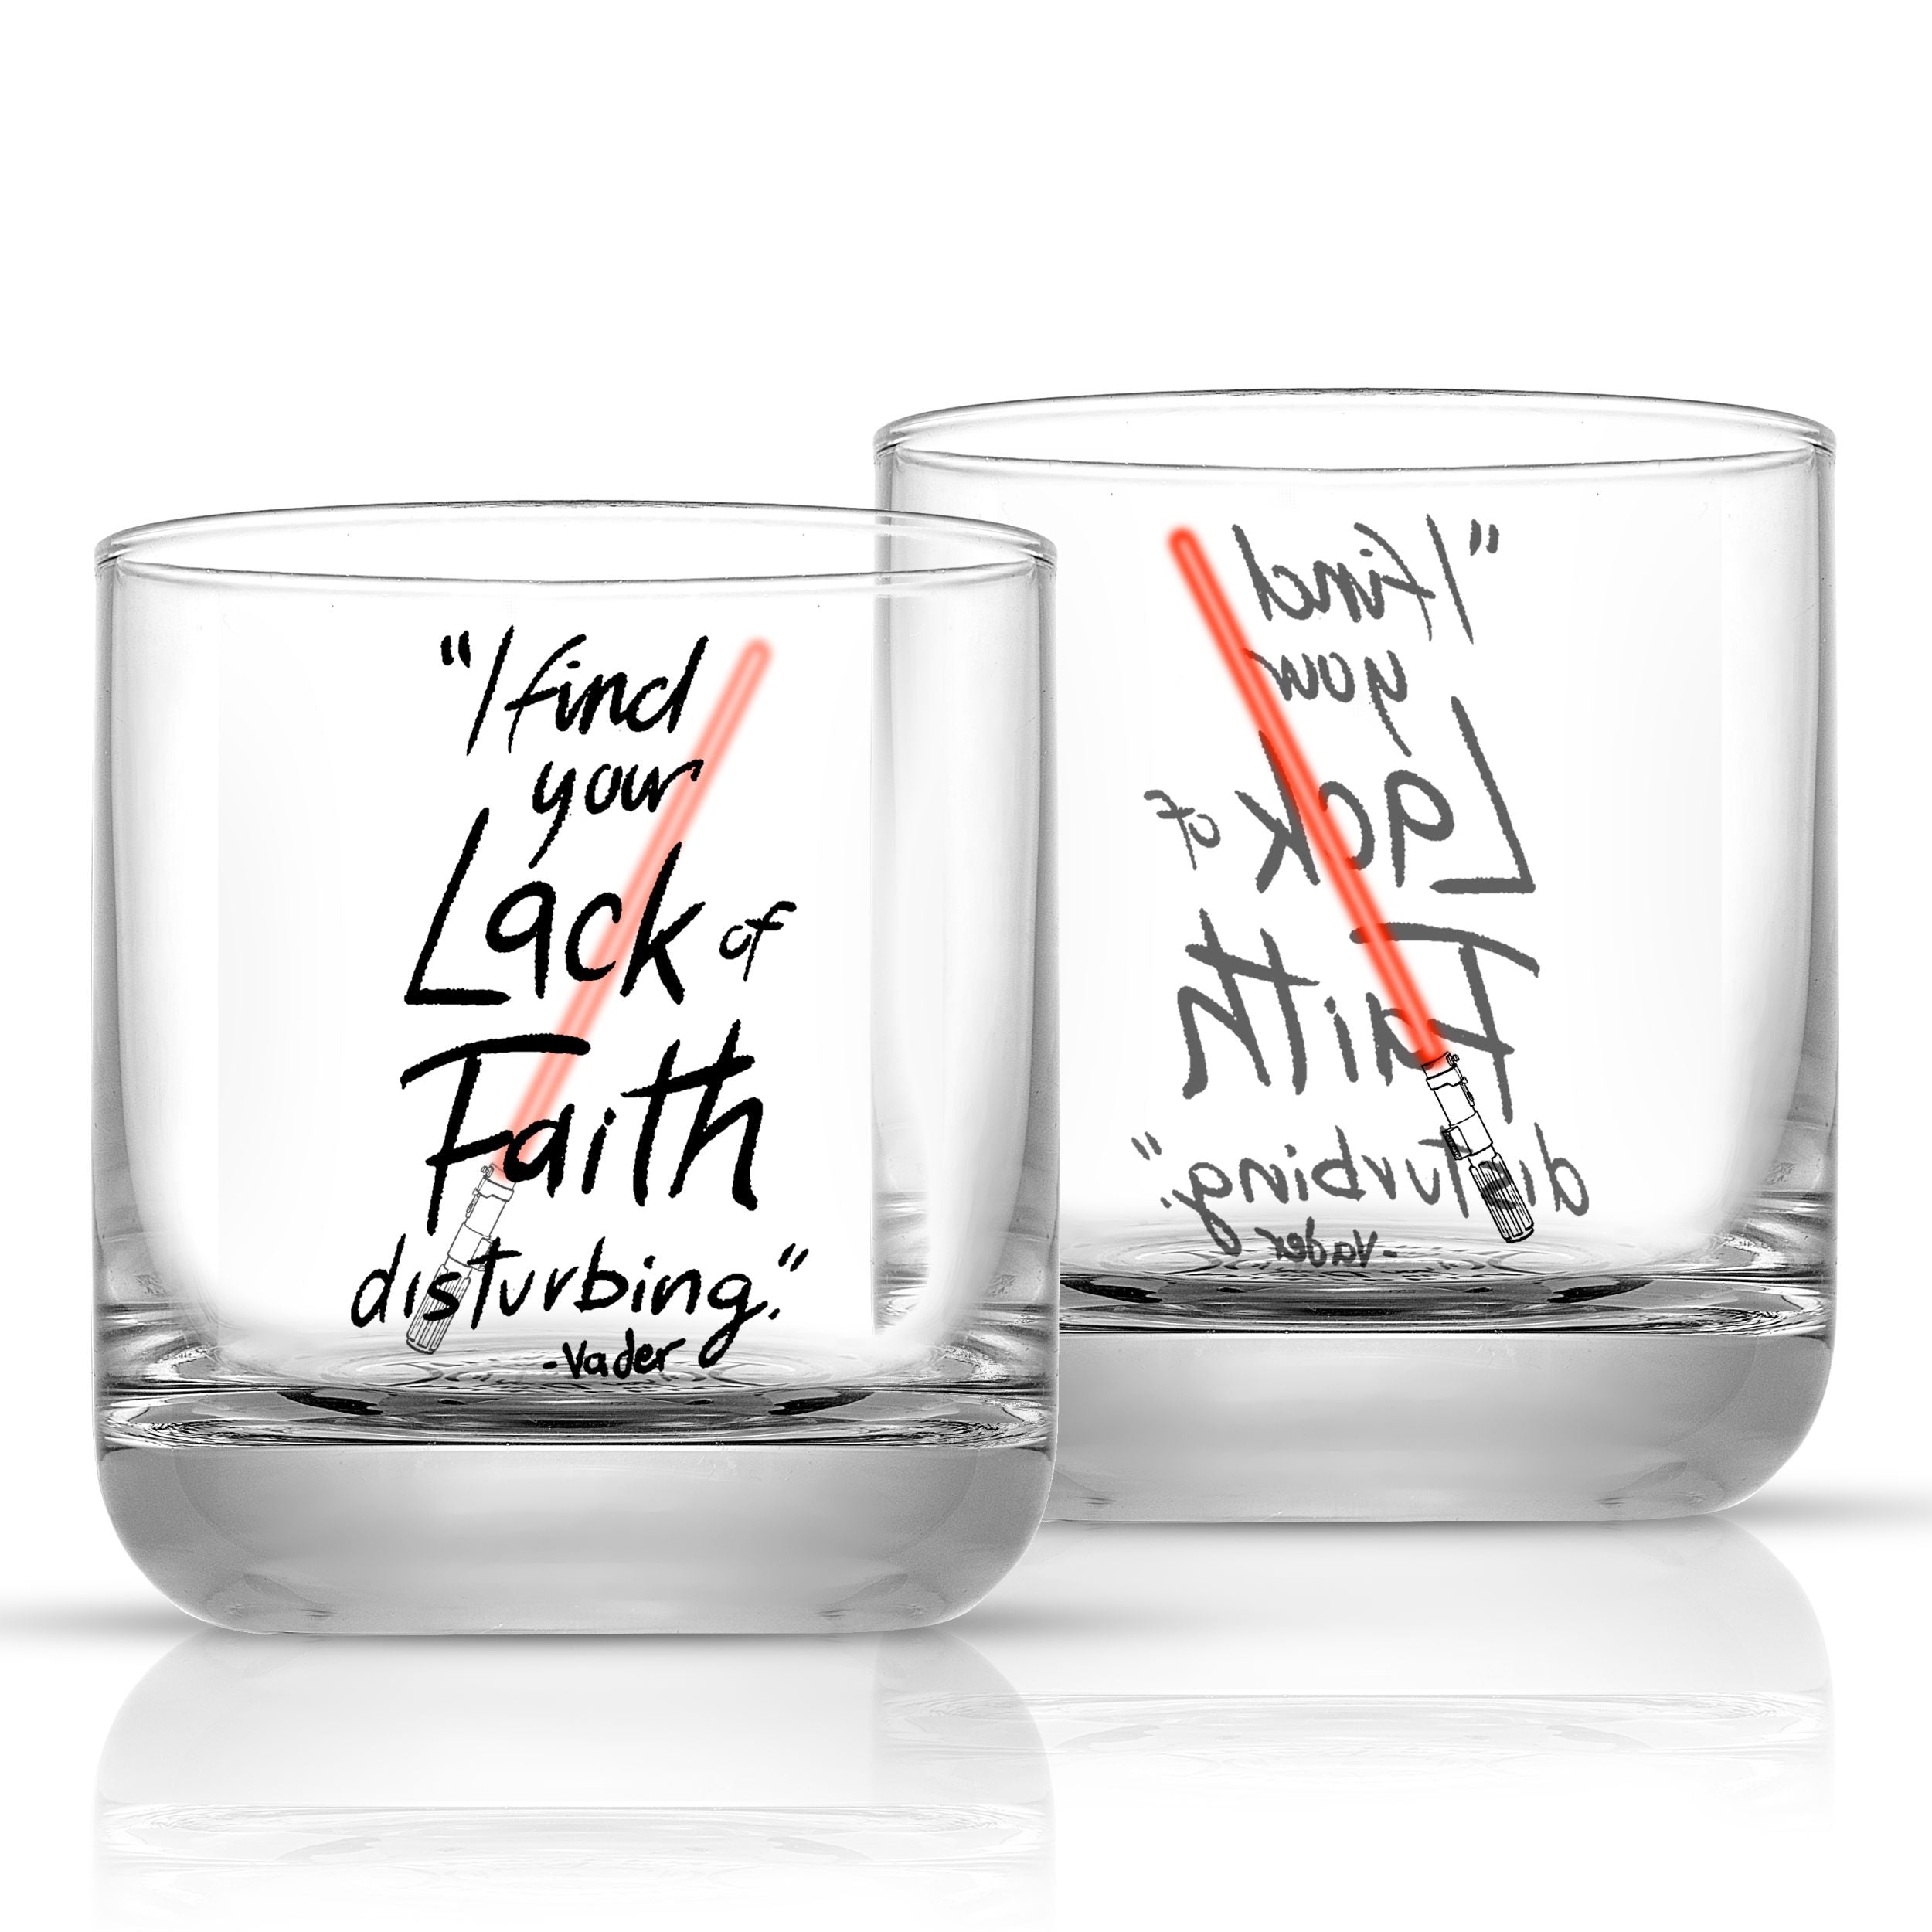 Star Wars Deco Double Old Fashion Drinking Glass - 10 oz - Set of